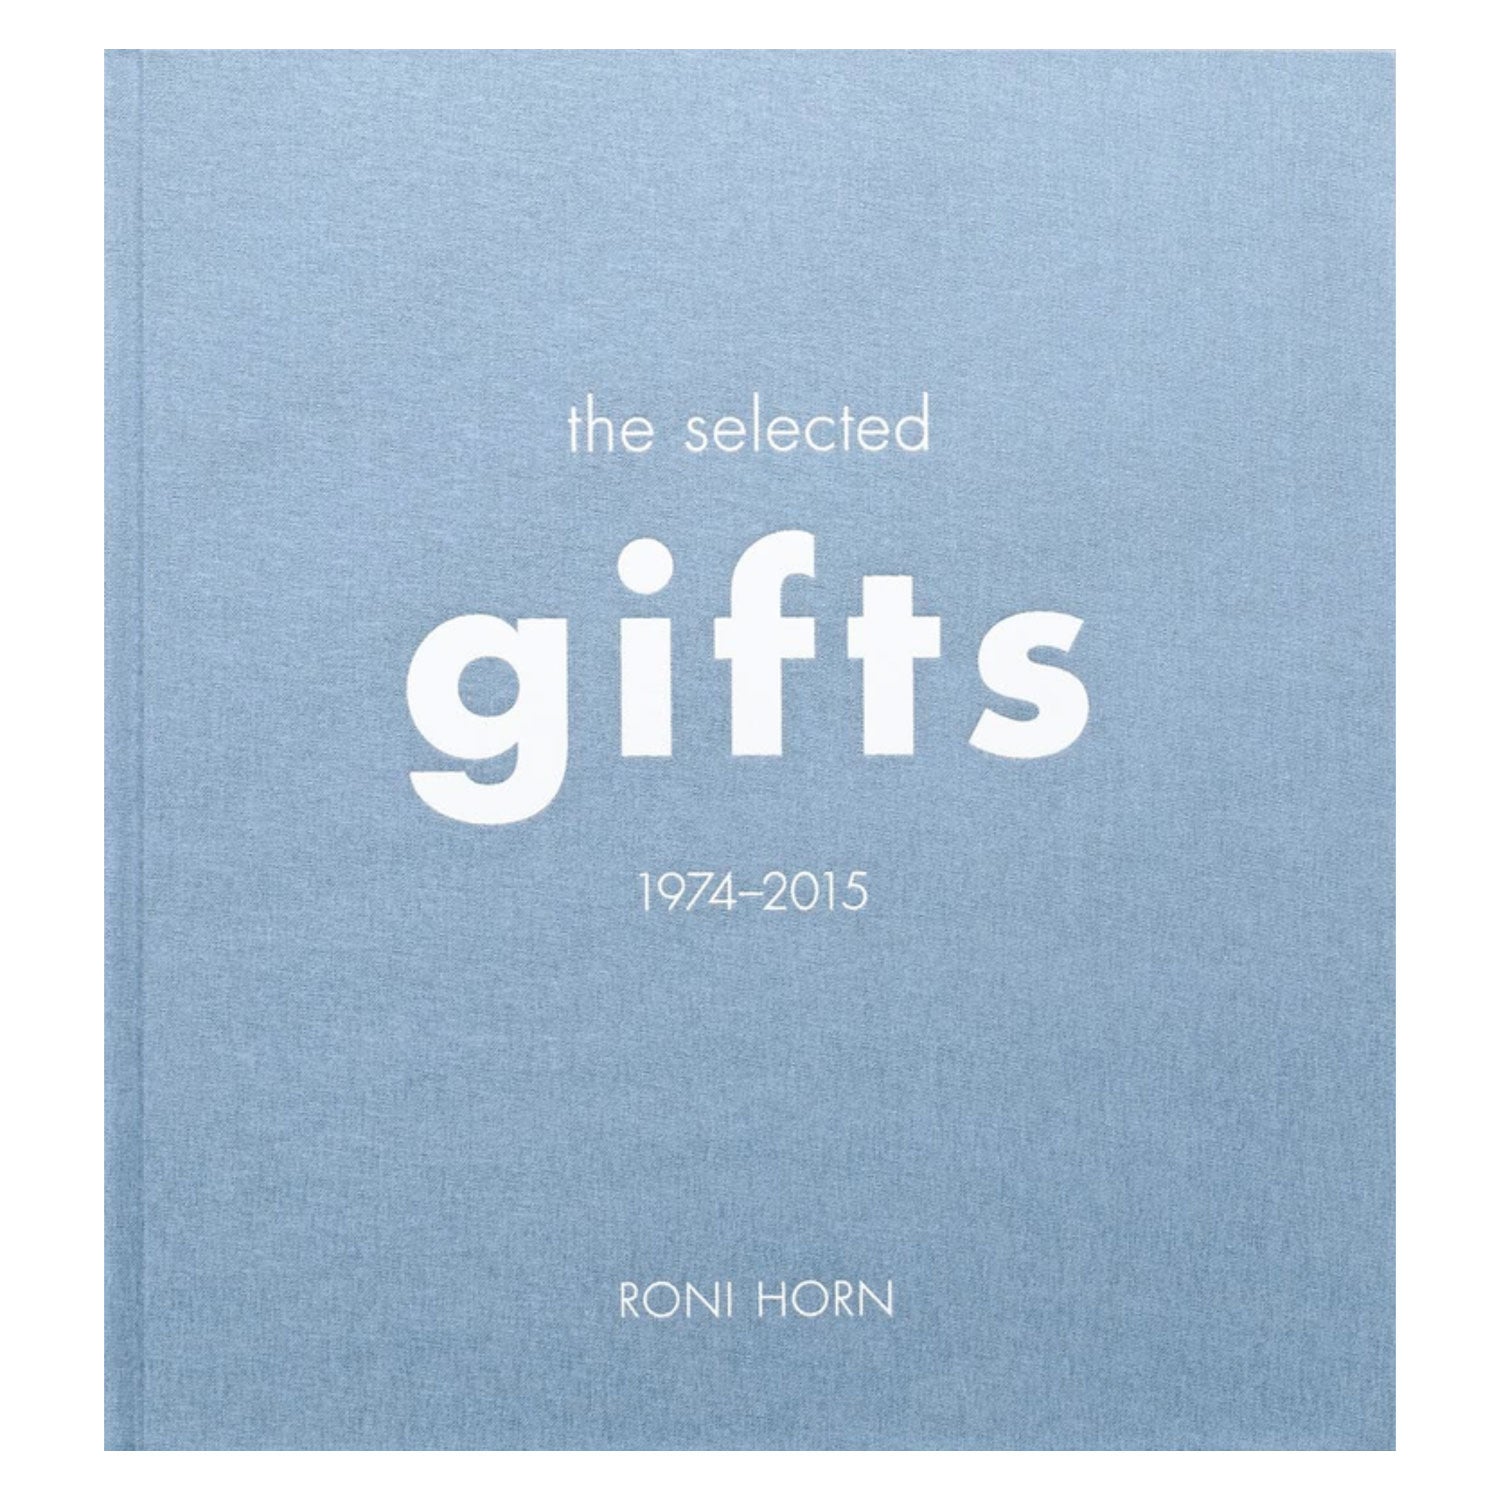 The Selected Gifts, 1974-2015 by Roni Horn Photo Museum Ireland